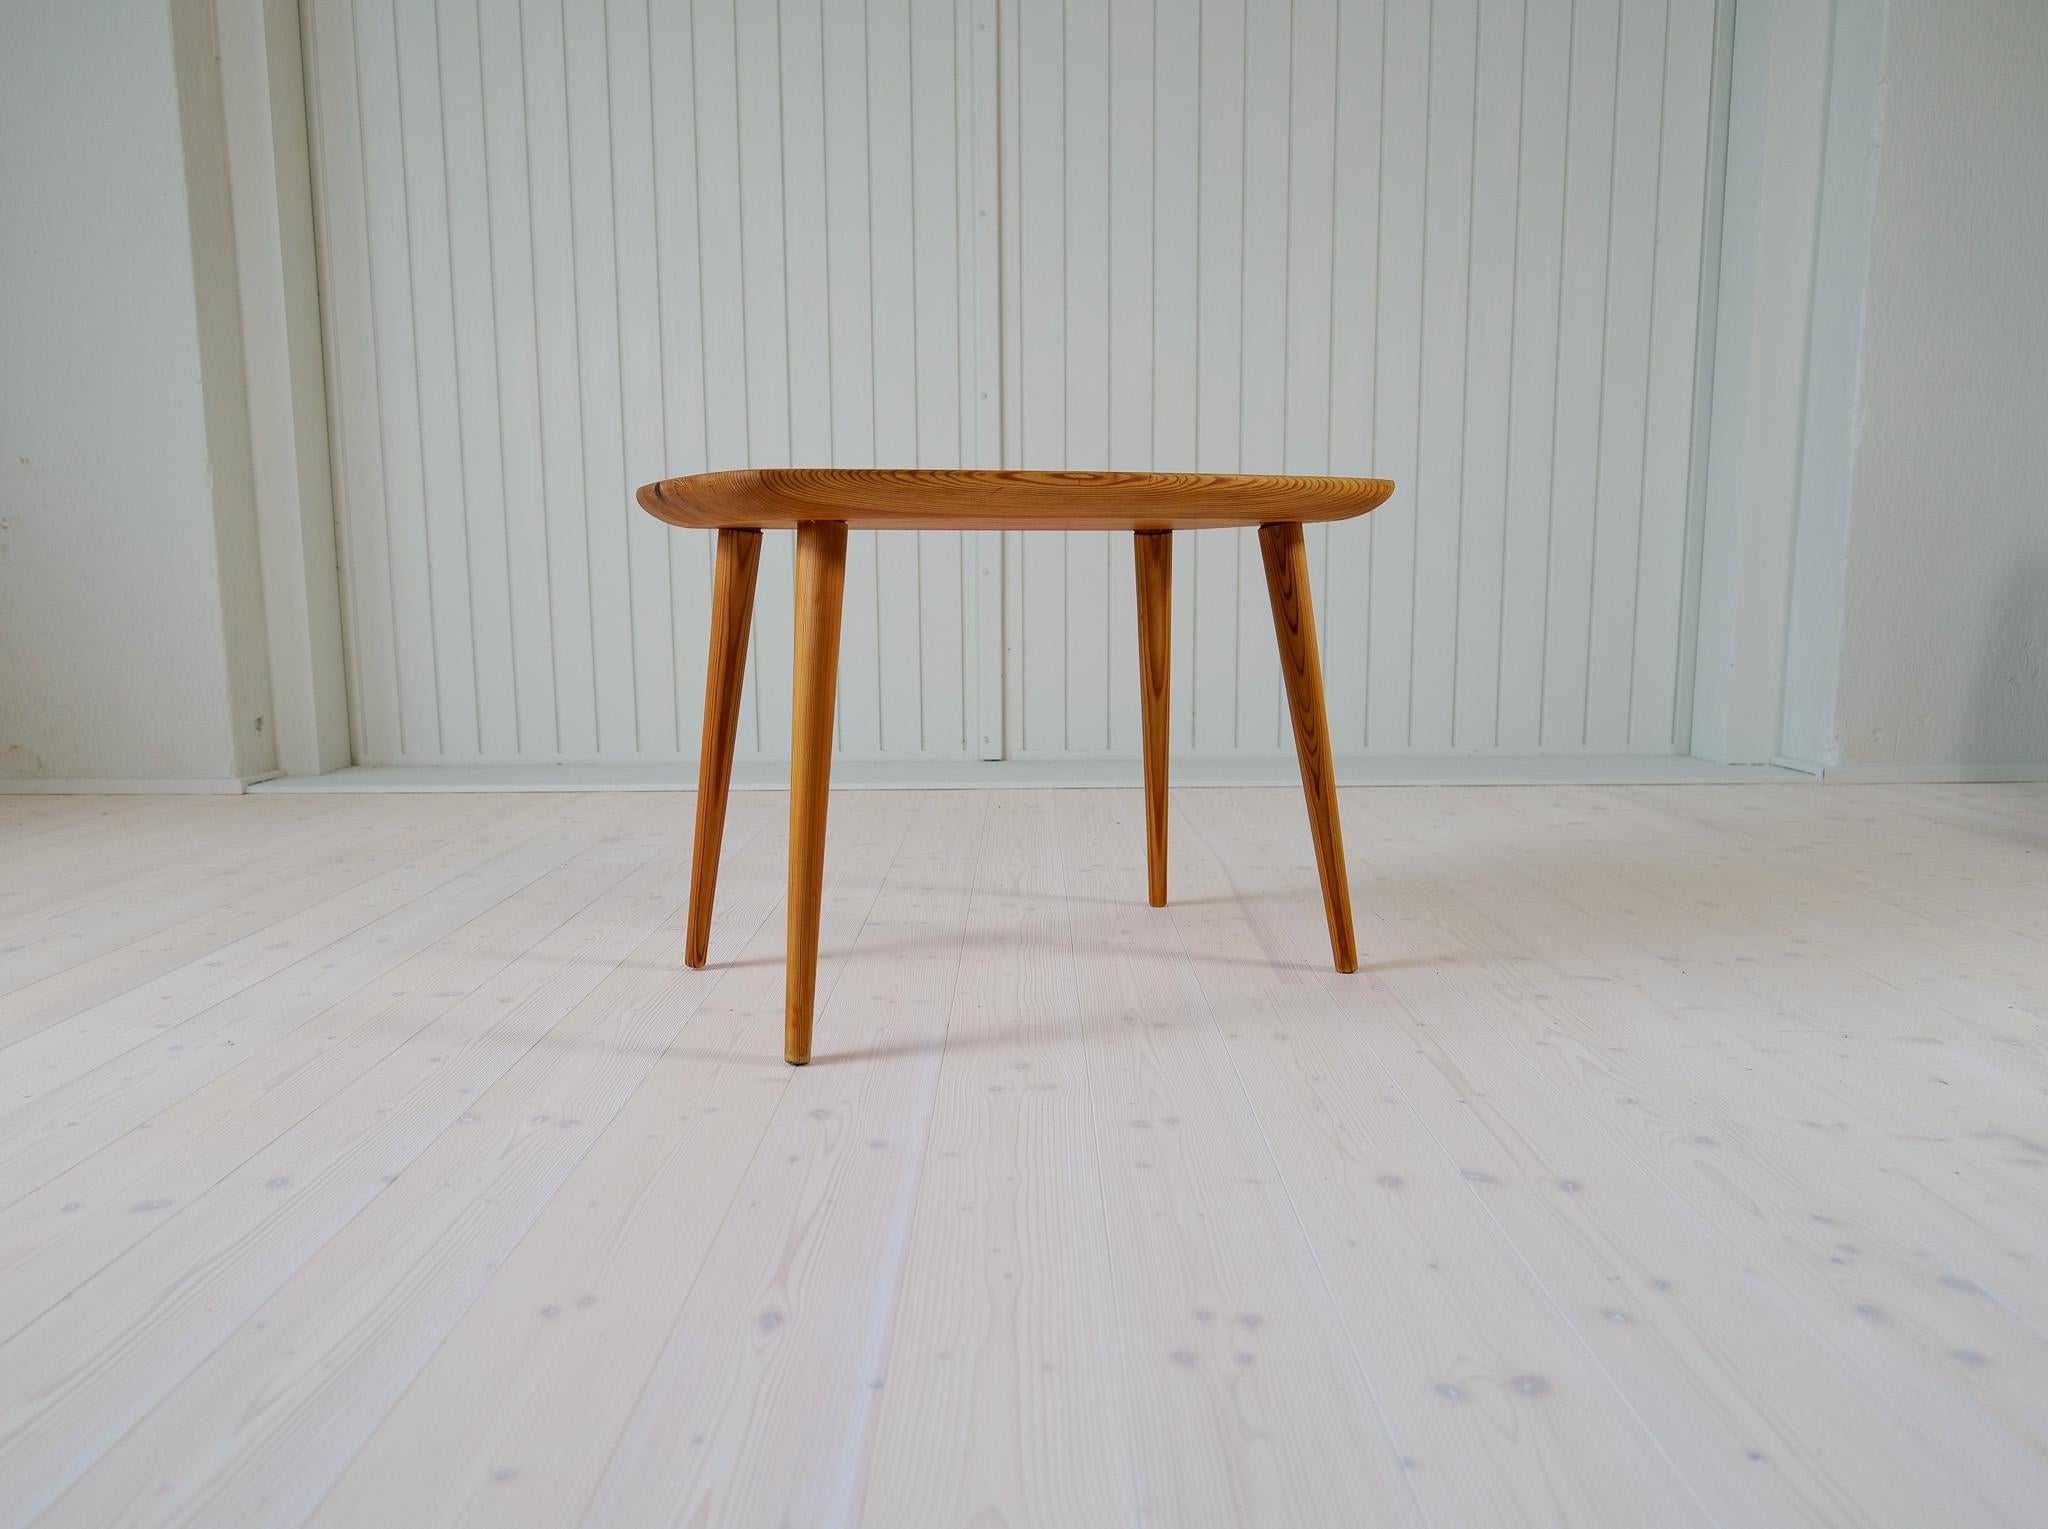 The typical minimalistic design but still sophisticated gives this coffee table made in Pine that Swedish / Nordic look. The grain visible giving it that characteristic vintage pine look. 

This one with patina and marks on the top. 

Dimensions: